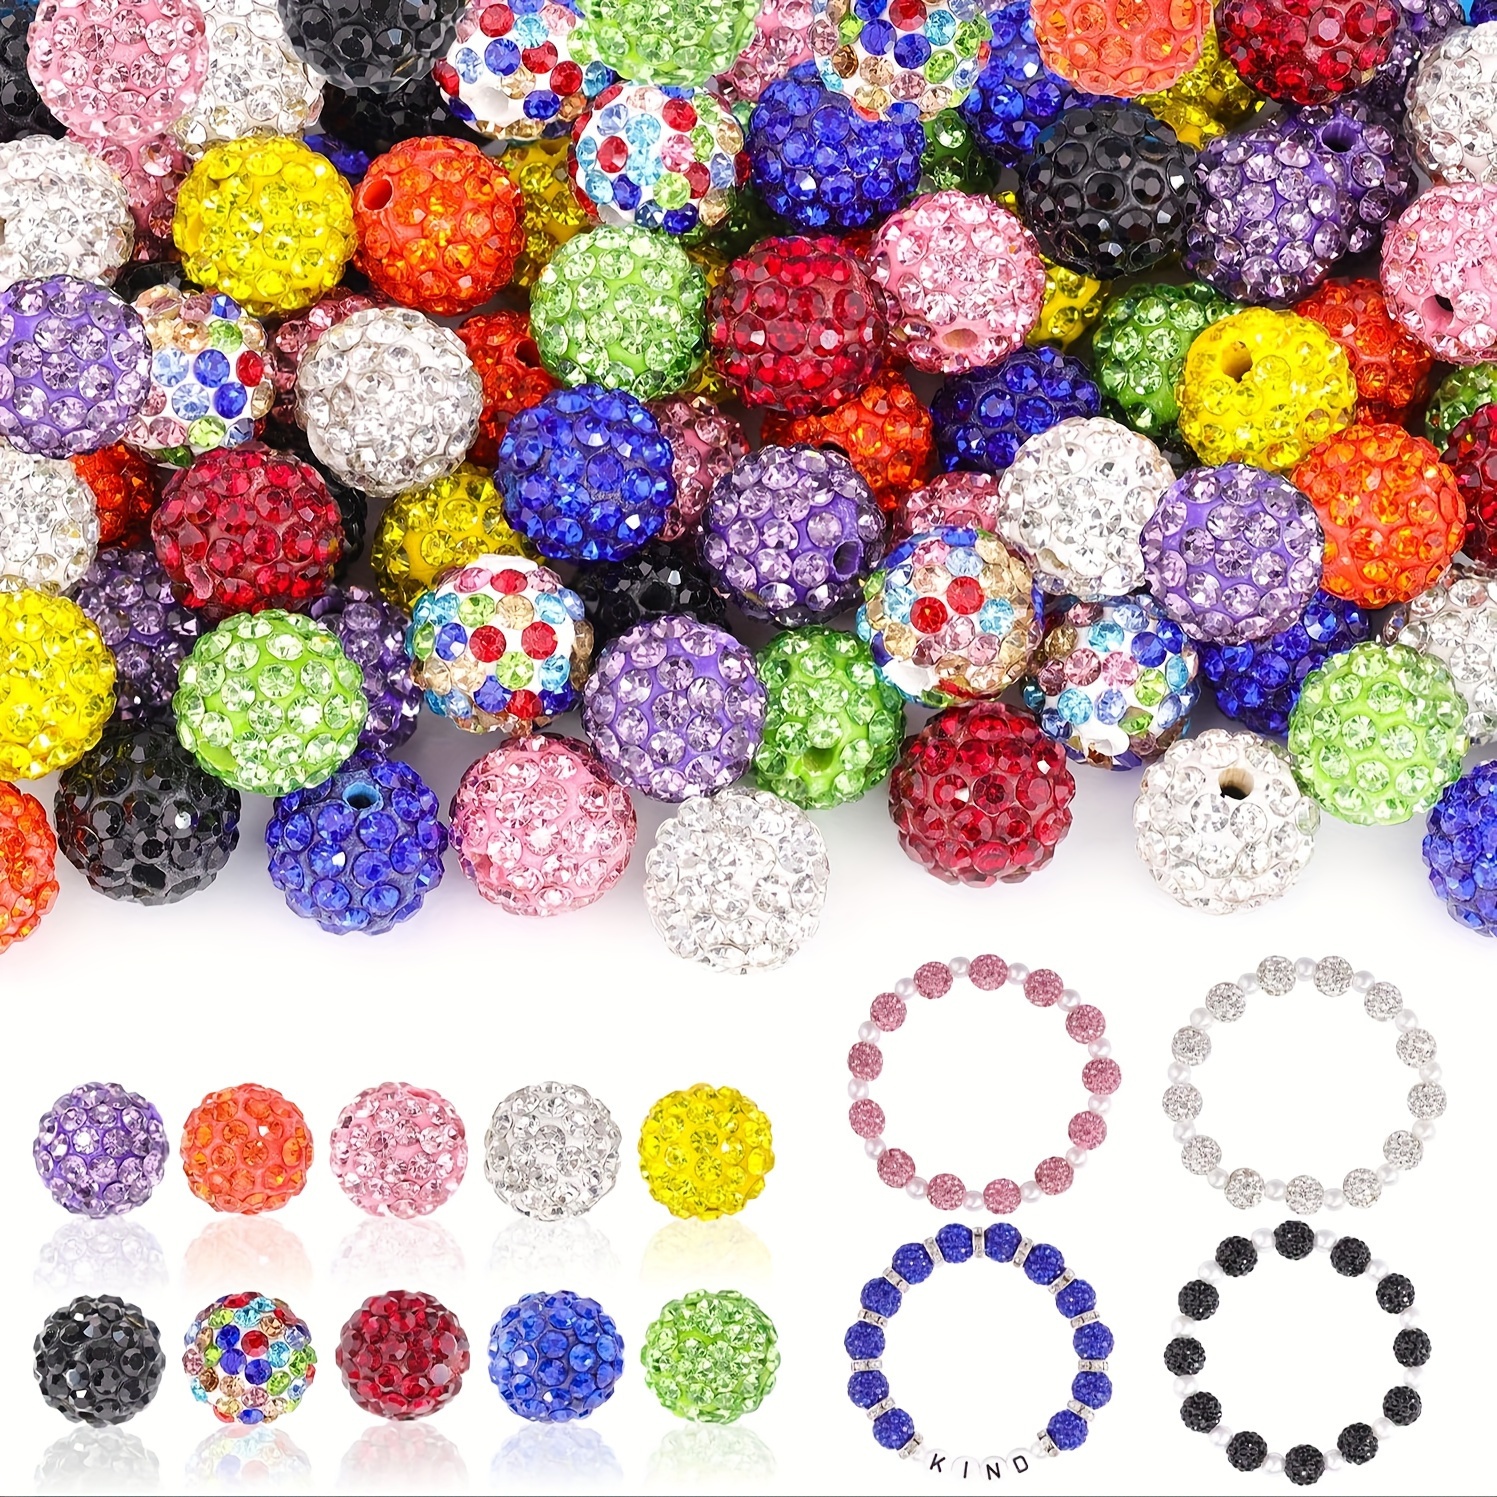 

100pcs 8mm Rhinestone 10 Mixed Colors Shiny Round Disco Ball Bulk Fancy Sparkle Crystal Clay Beads For Jewelry Making Diy Necklace Bracelet Earrings Beaded Decorations